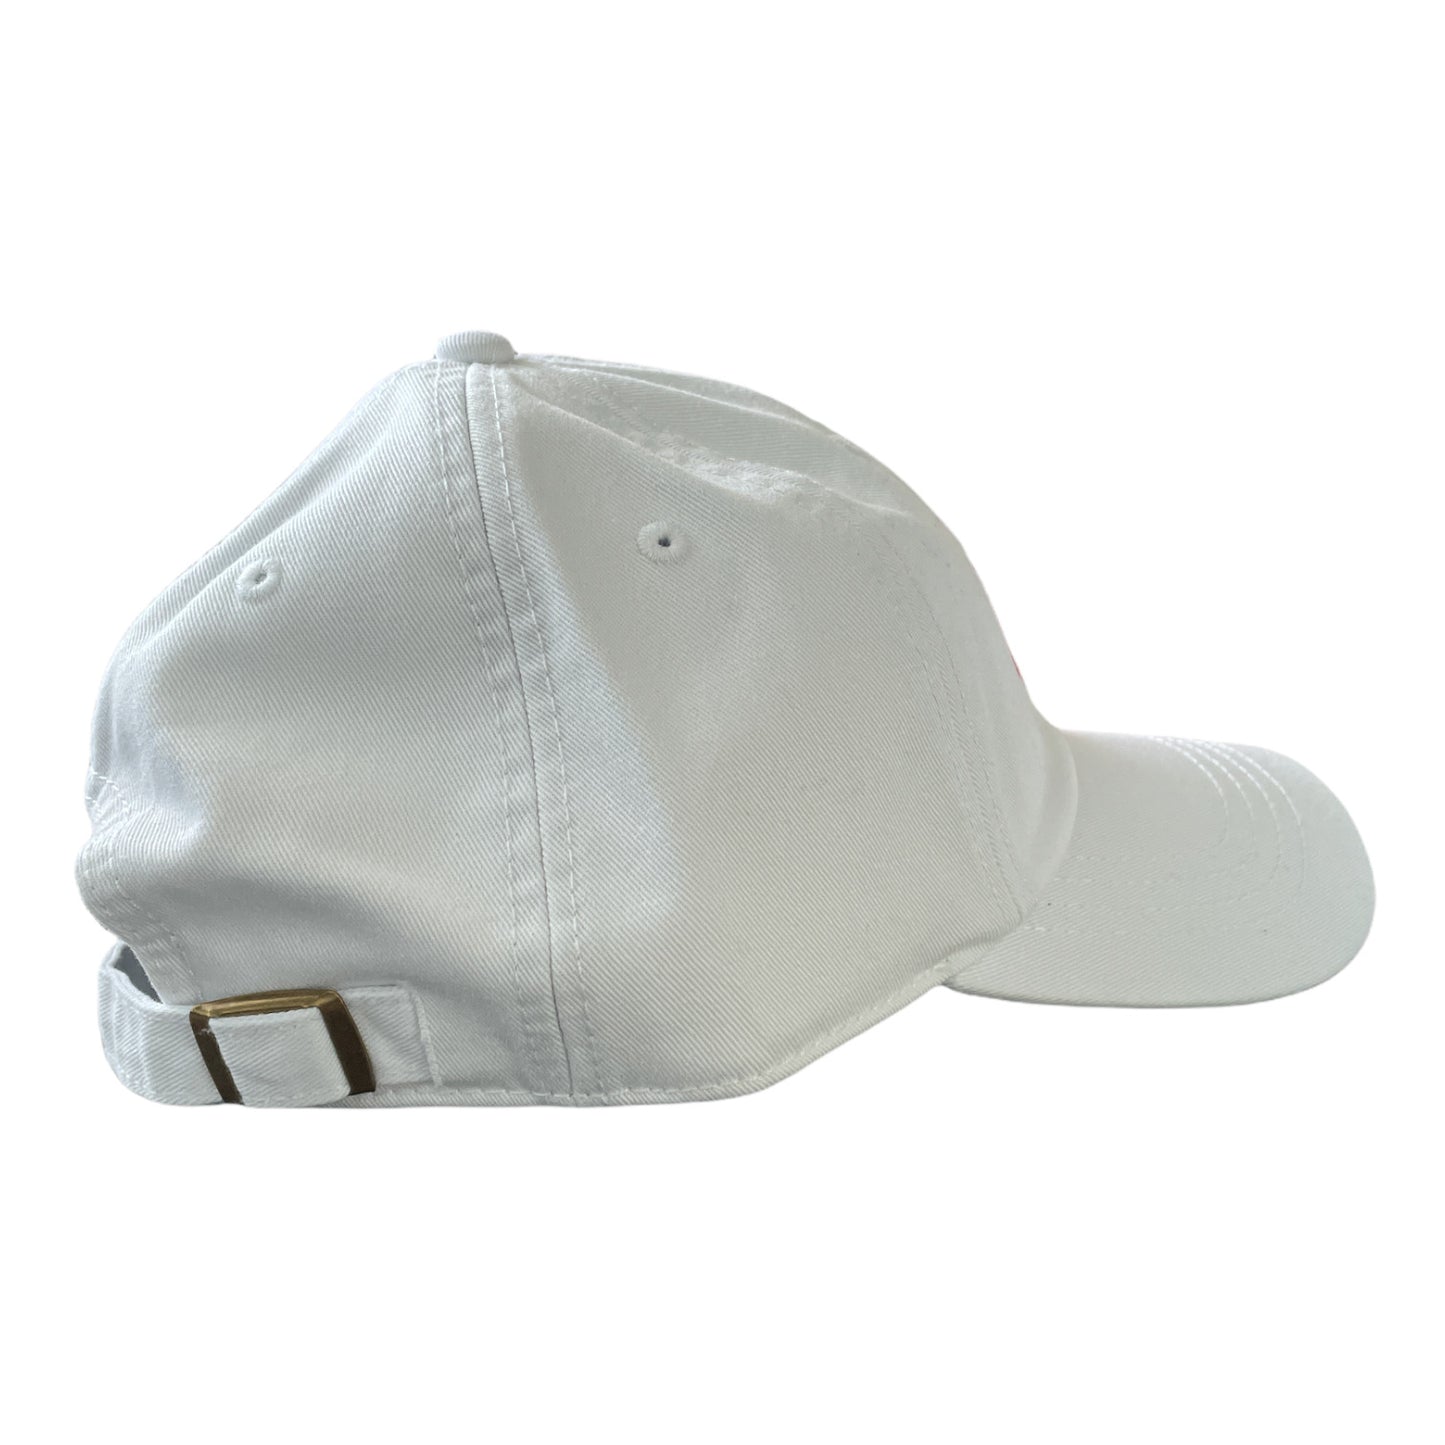 State of Mine Unisex "USA" Baseball Cap, White, One Size Fits Most